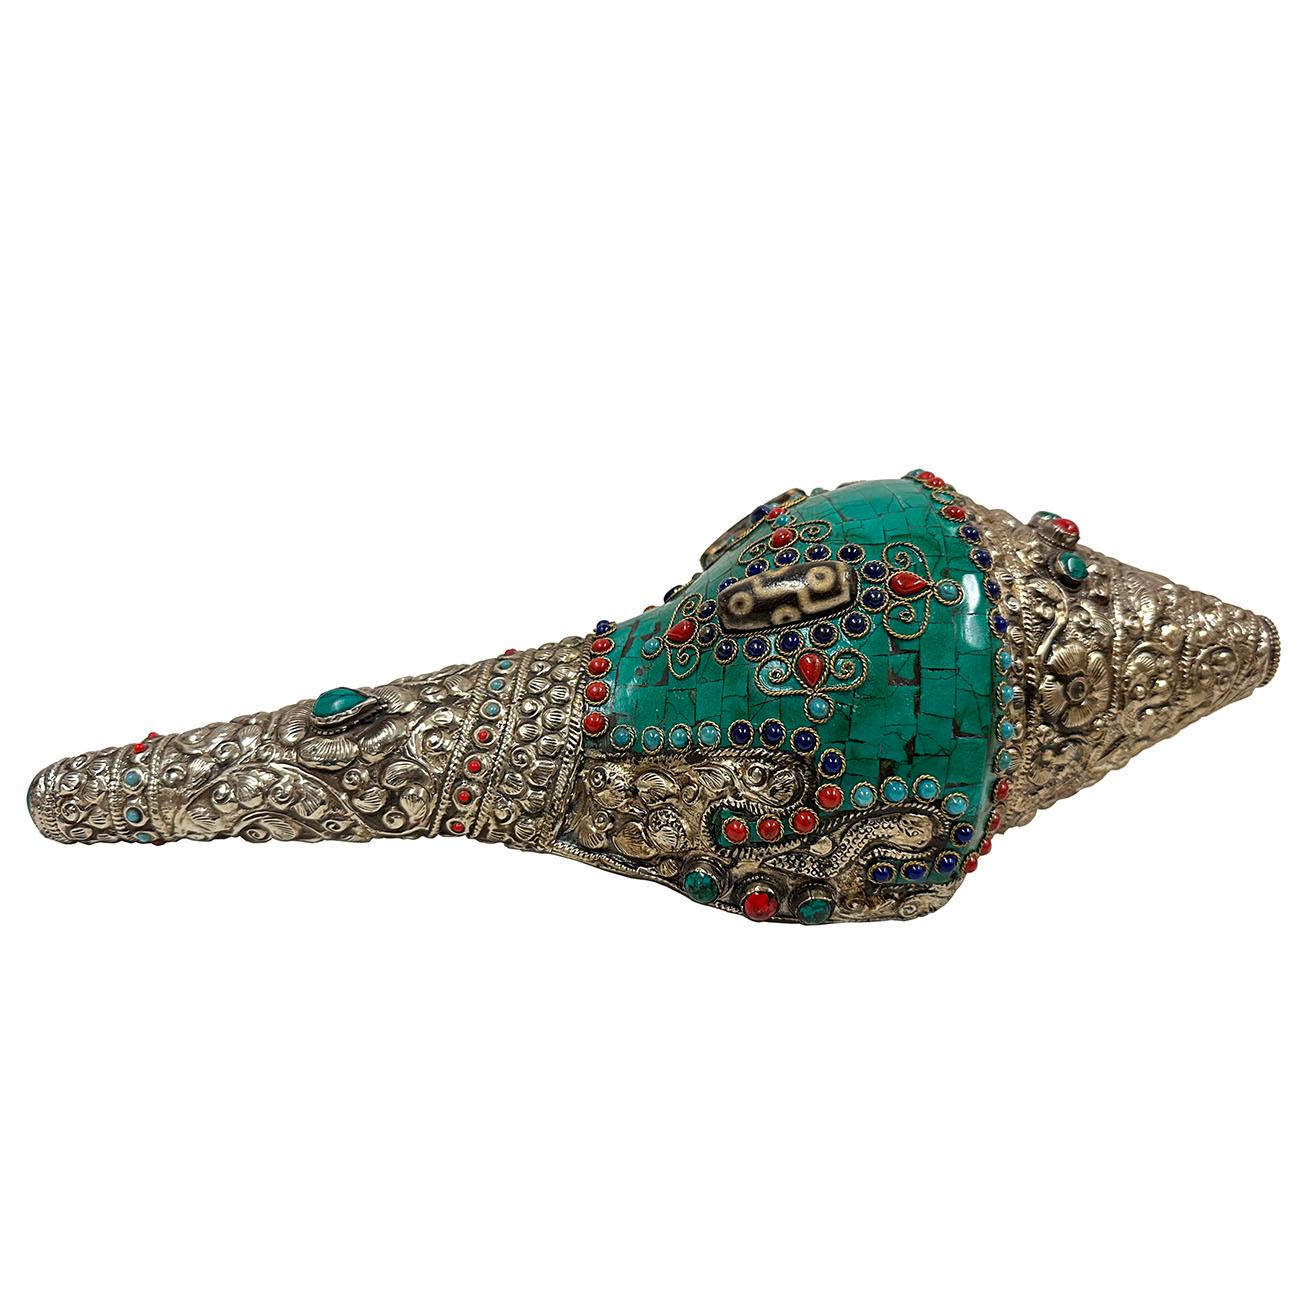 20th Century  Antique Tibetan Buddhist Conch Shell with Turquoise, Coral and DZI inlay  For Sale